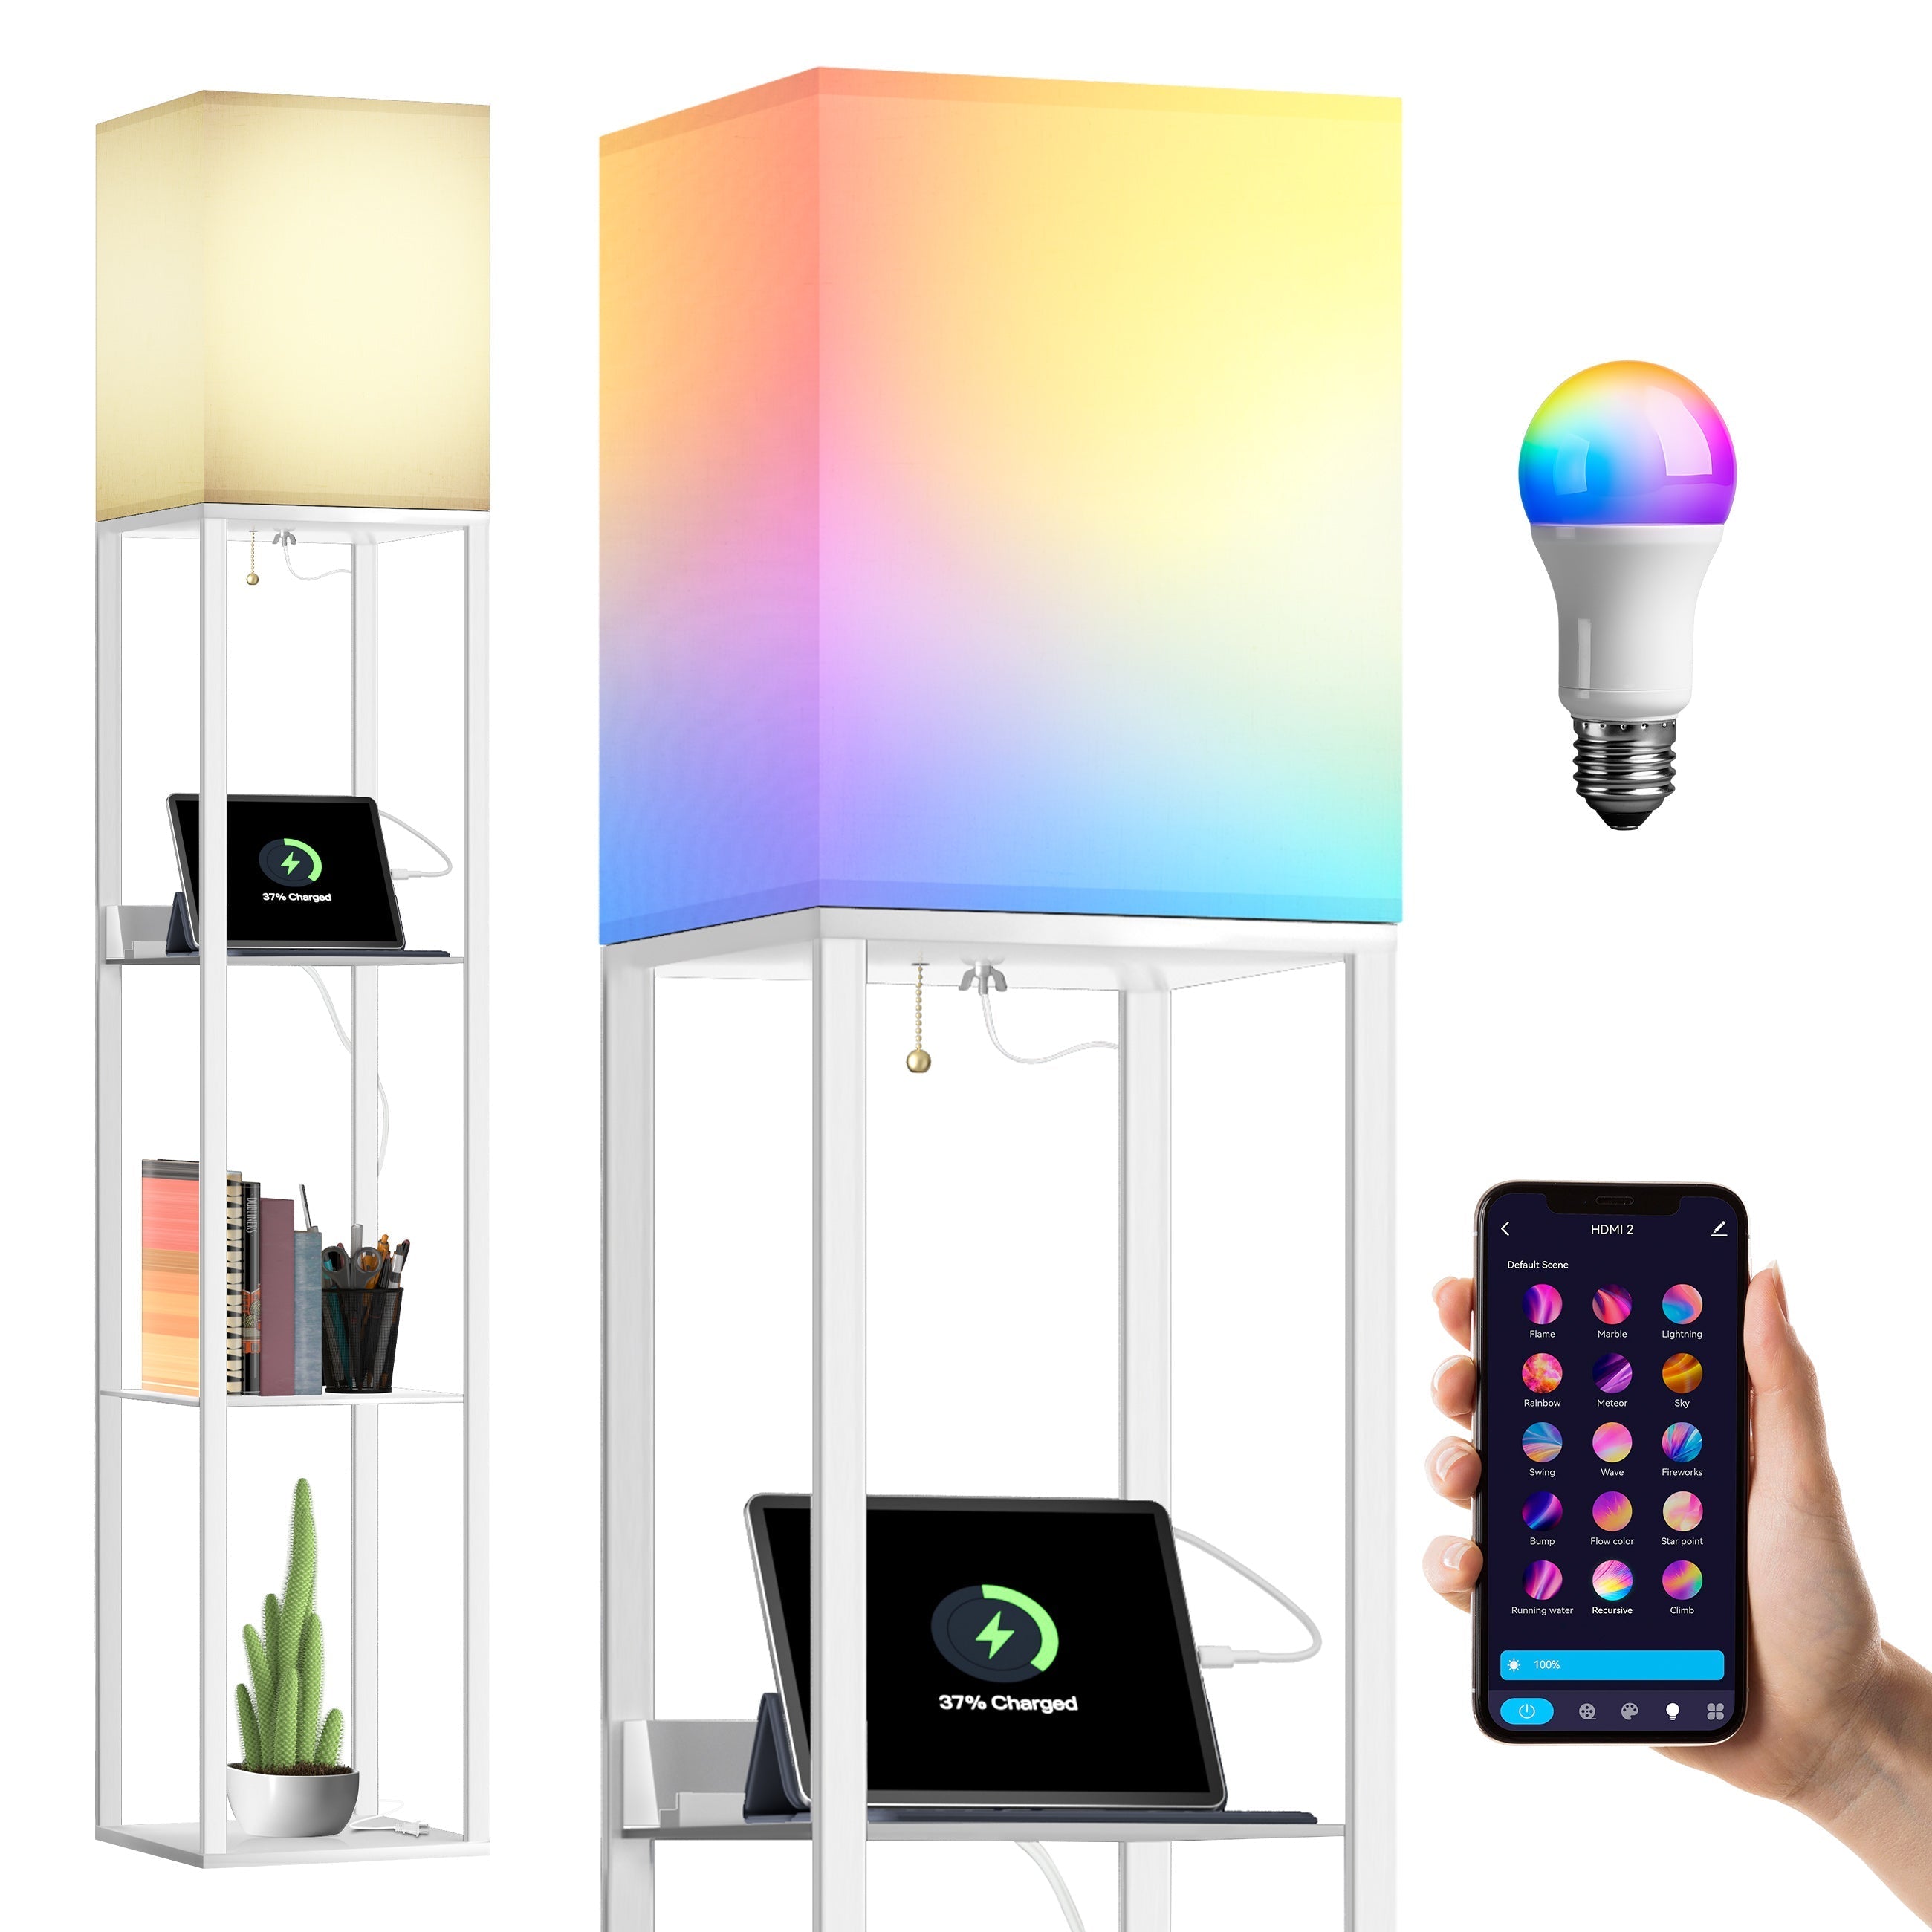 Evajoy Floor Lamp with Shelves, Smart RGB Floor Lamps Work with Alexa, with 2 USB Ports & 1 AC Output, Modern 4-tier Lamp for Display Storage, Floor Lamps for Living Room, Bedroom, Office